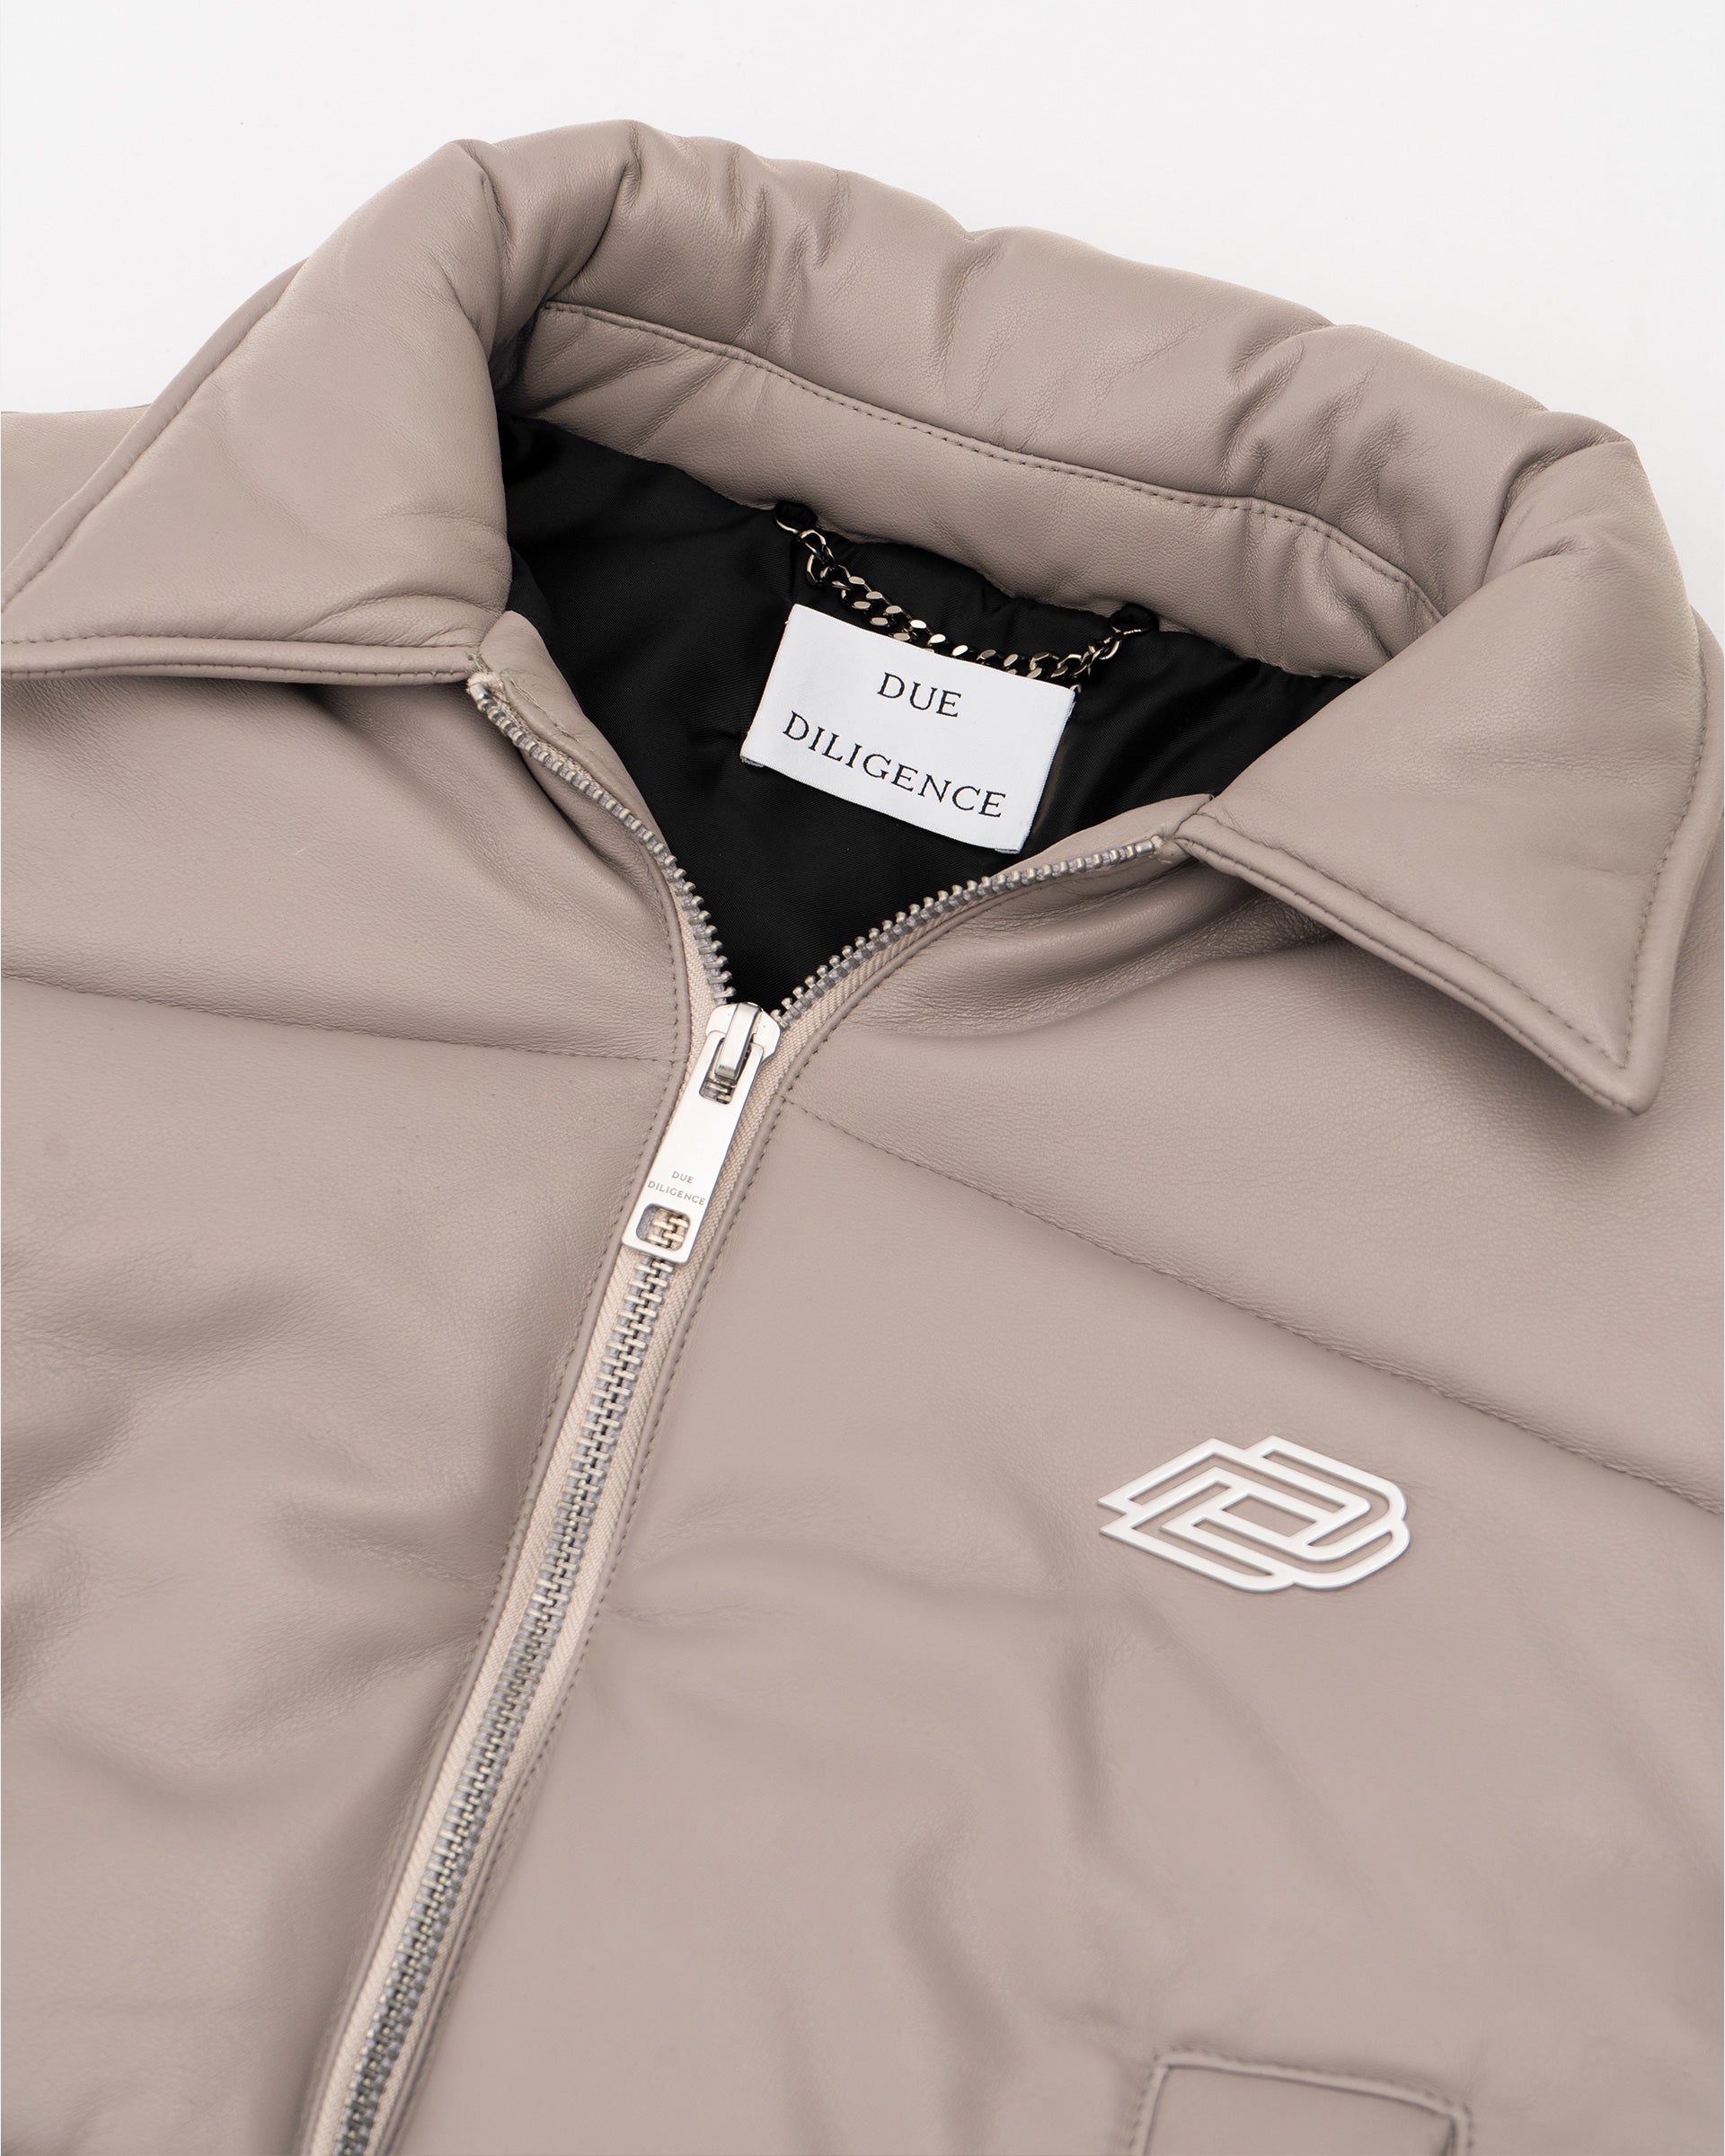 Nappa Leather Down Fill Jacket - Due Diligence Apparel